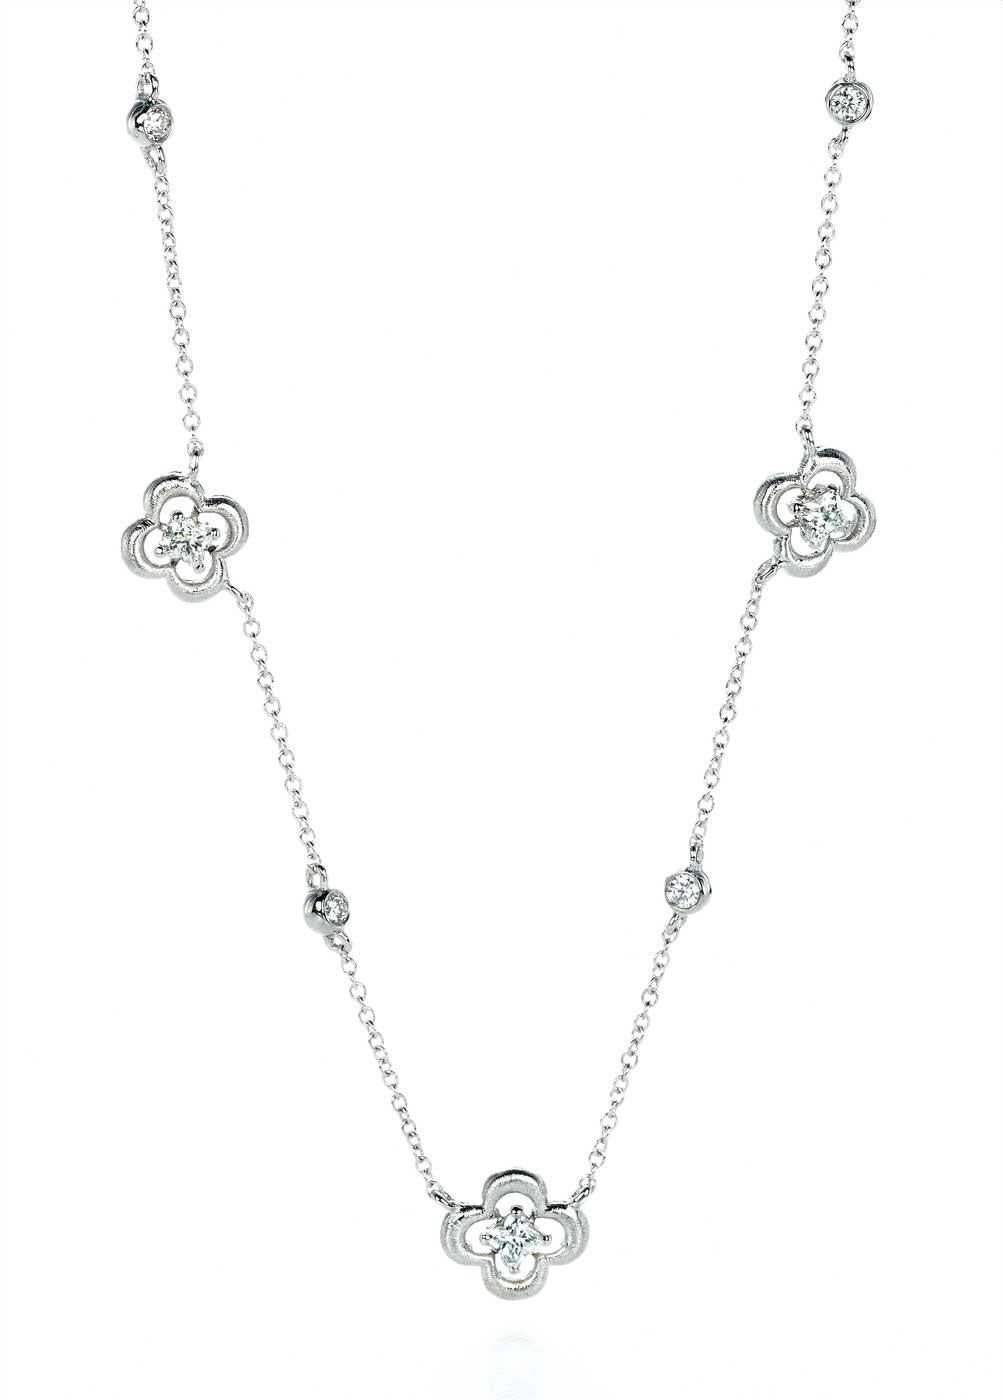 18KT white gold station diamond flower necklace. 3 LILY CUT ® flower shape diamond H color VS SI clarity  0.53 cts . additional 0.22 ct round diamond accent .   17 inch with a link to shorten to 16 inch . 